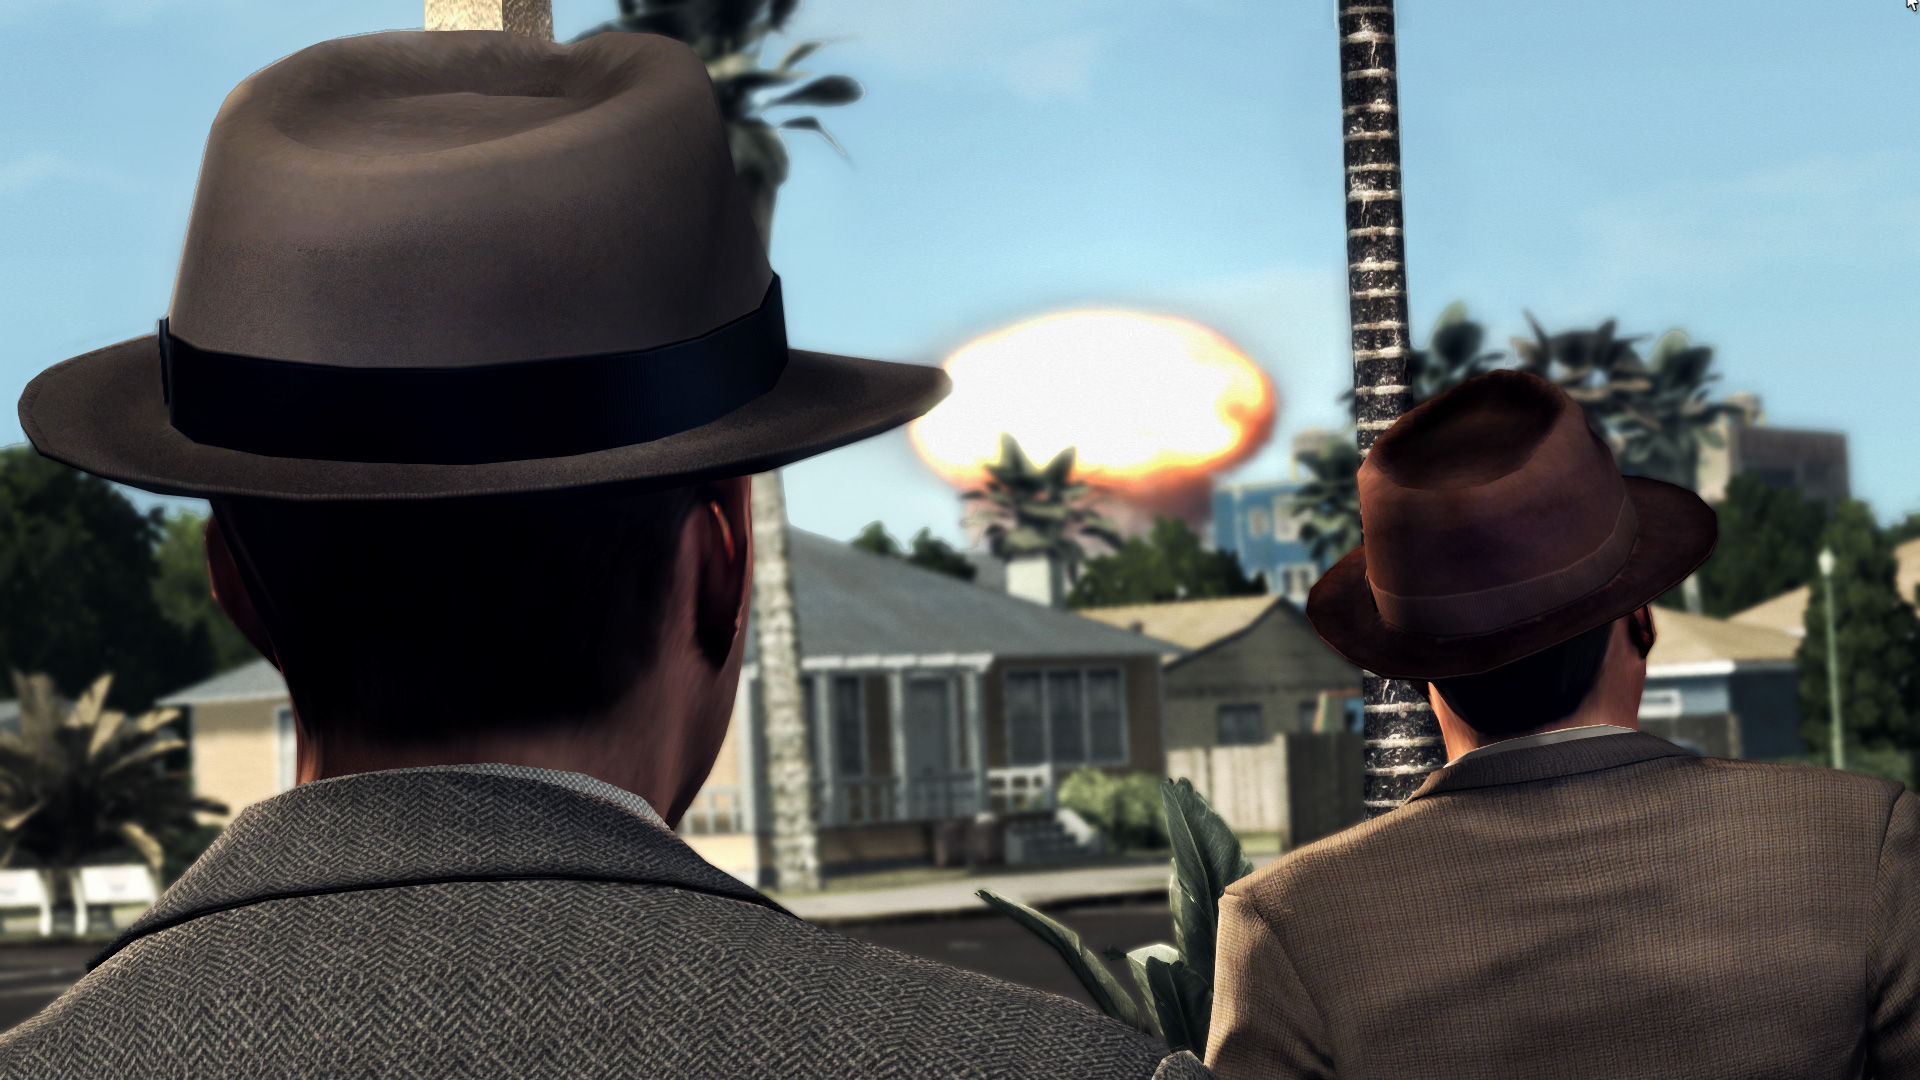 Save 70% on L.A. Noire on Steam